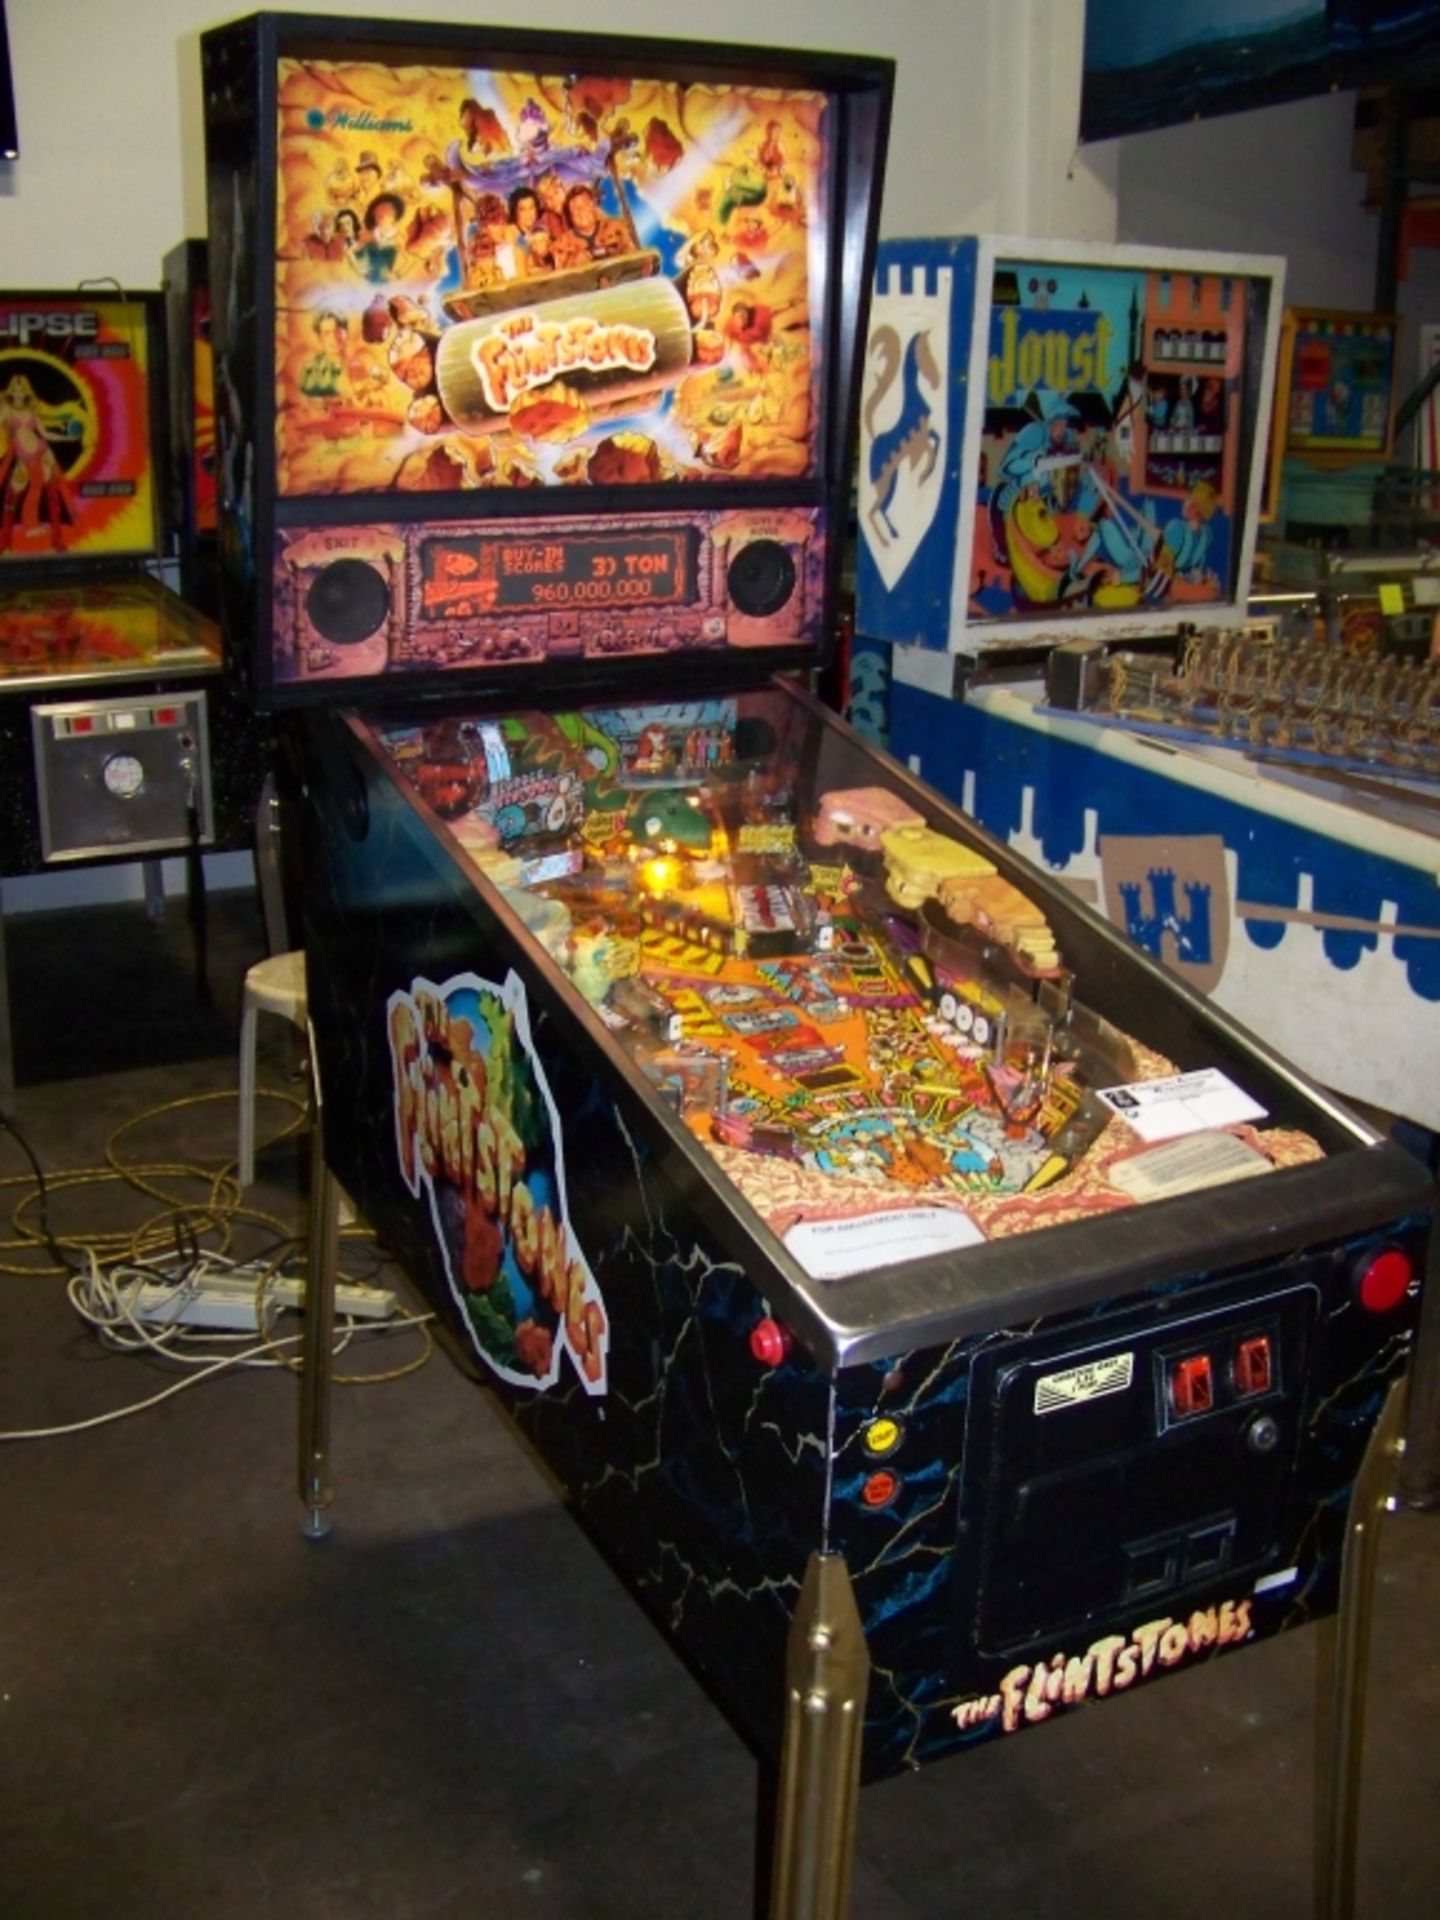 FLINSTONES THE MOVIE PINBALL MACHINE WILLIAMS 1994 Item is in used condition. Evidence of wear and